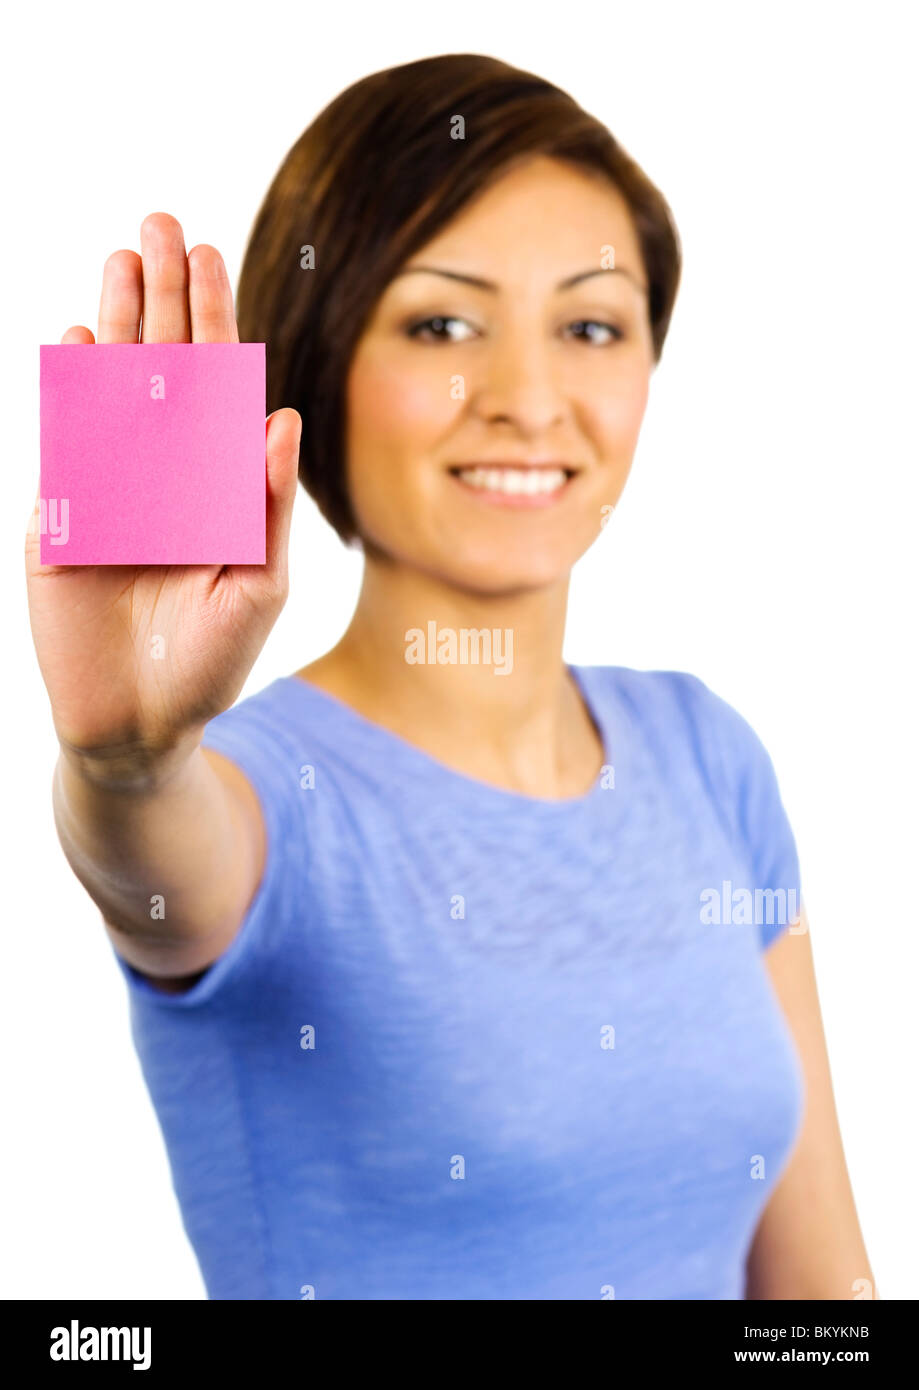 Young woman has a pink sticky note on the palm of her outstretched hand Stock Photo